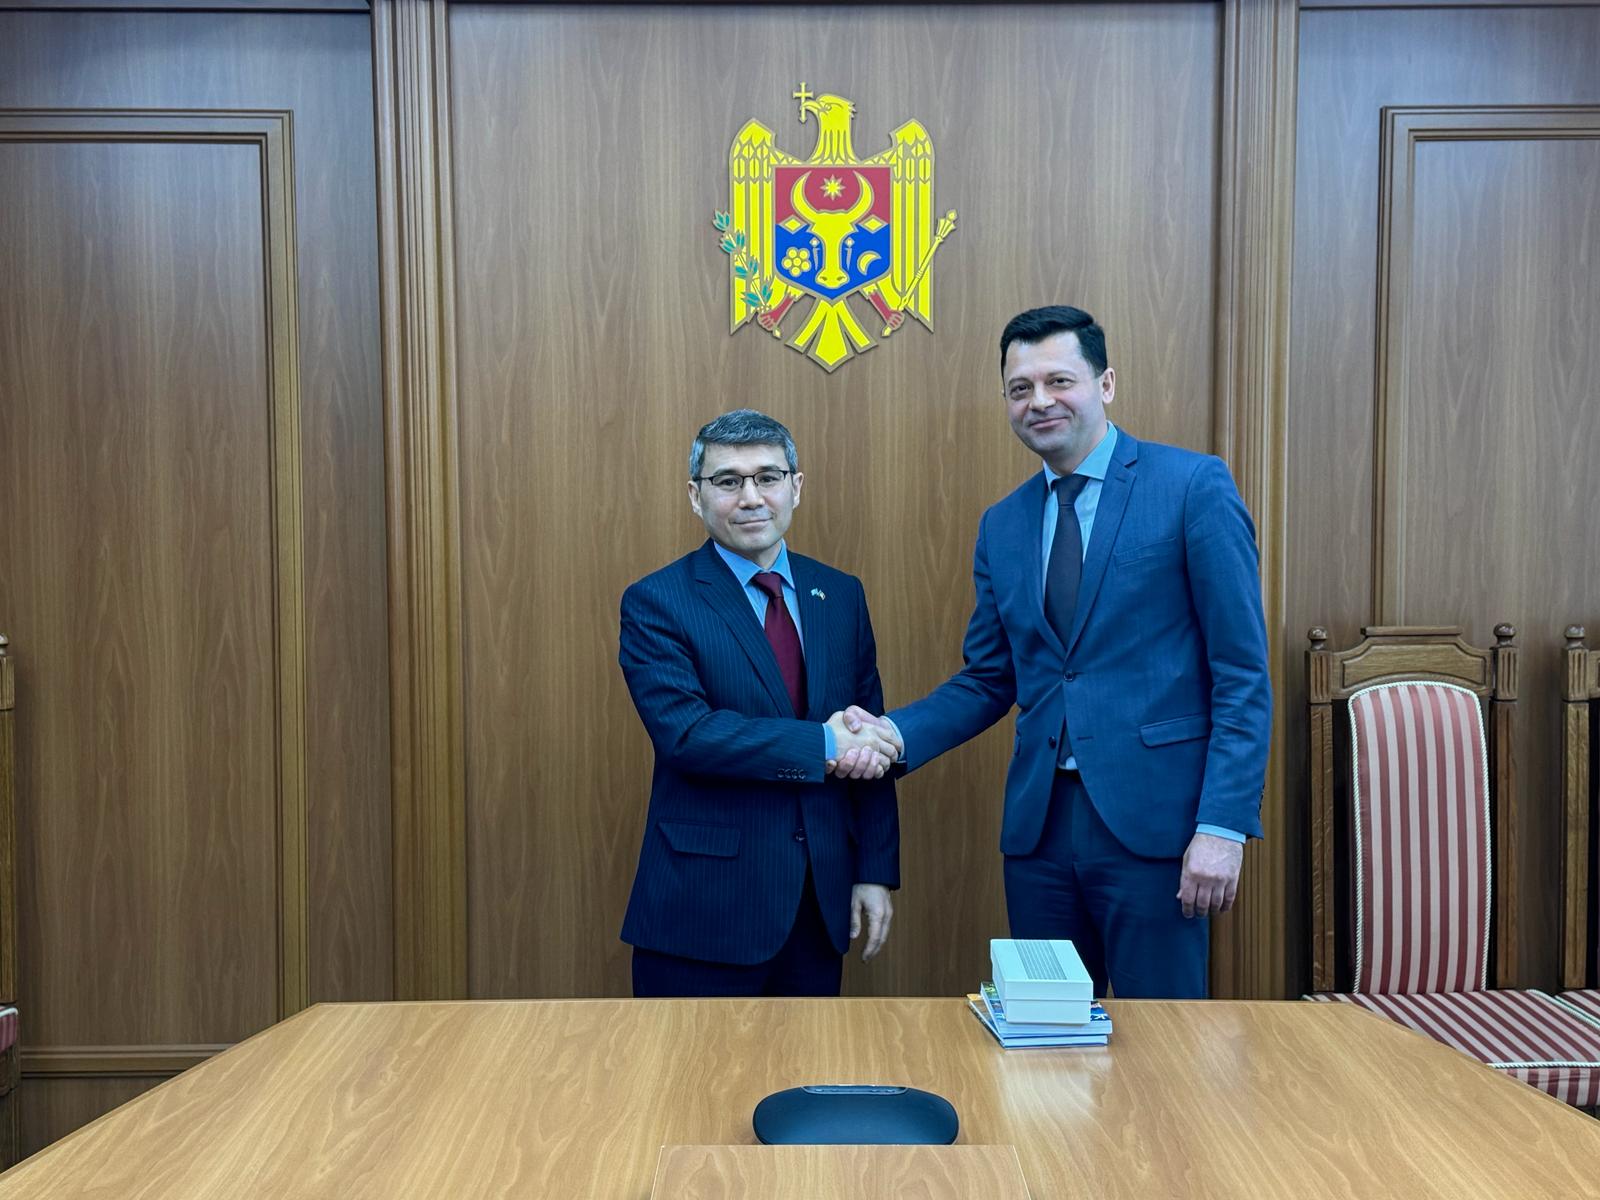 Kazakhstan and Moldova confirmed their intention to strengthen all areas of cooperation